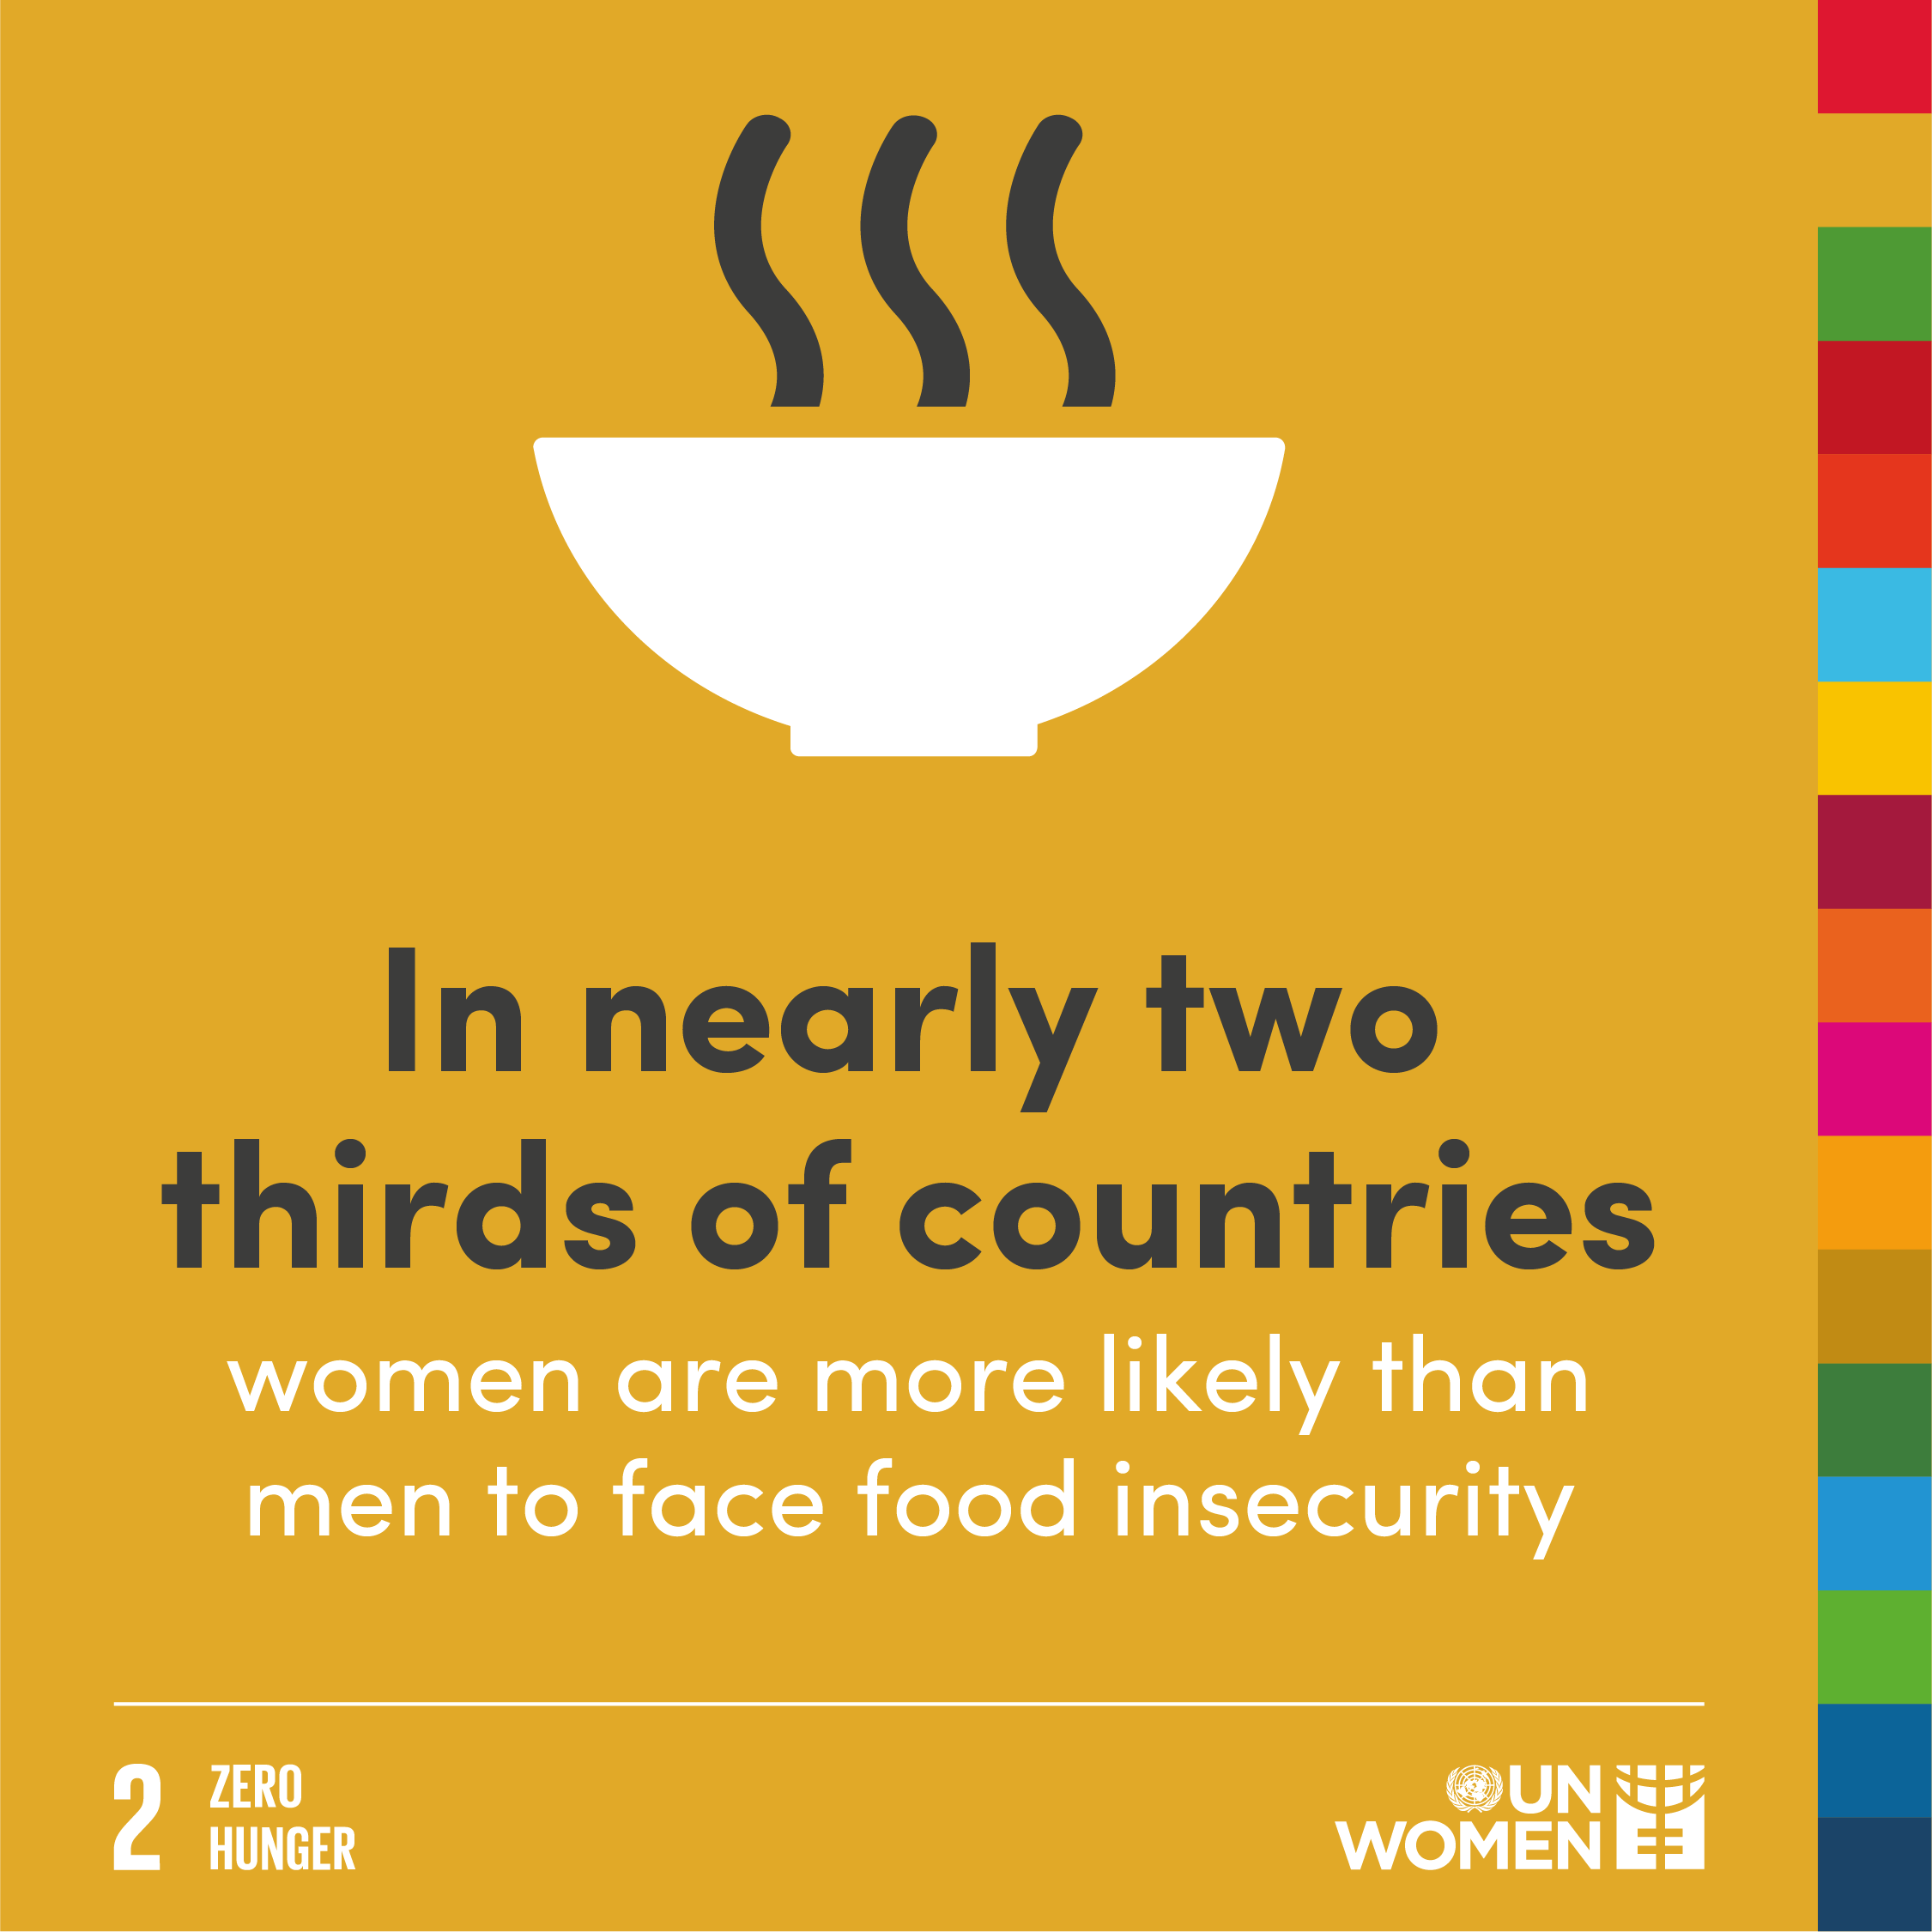 In nearly two thirds of countries women are more likely than men to face food insecurity. 